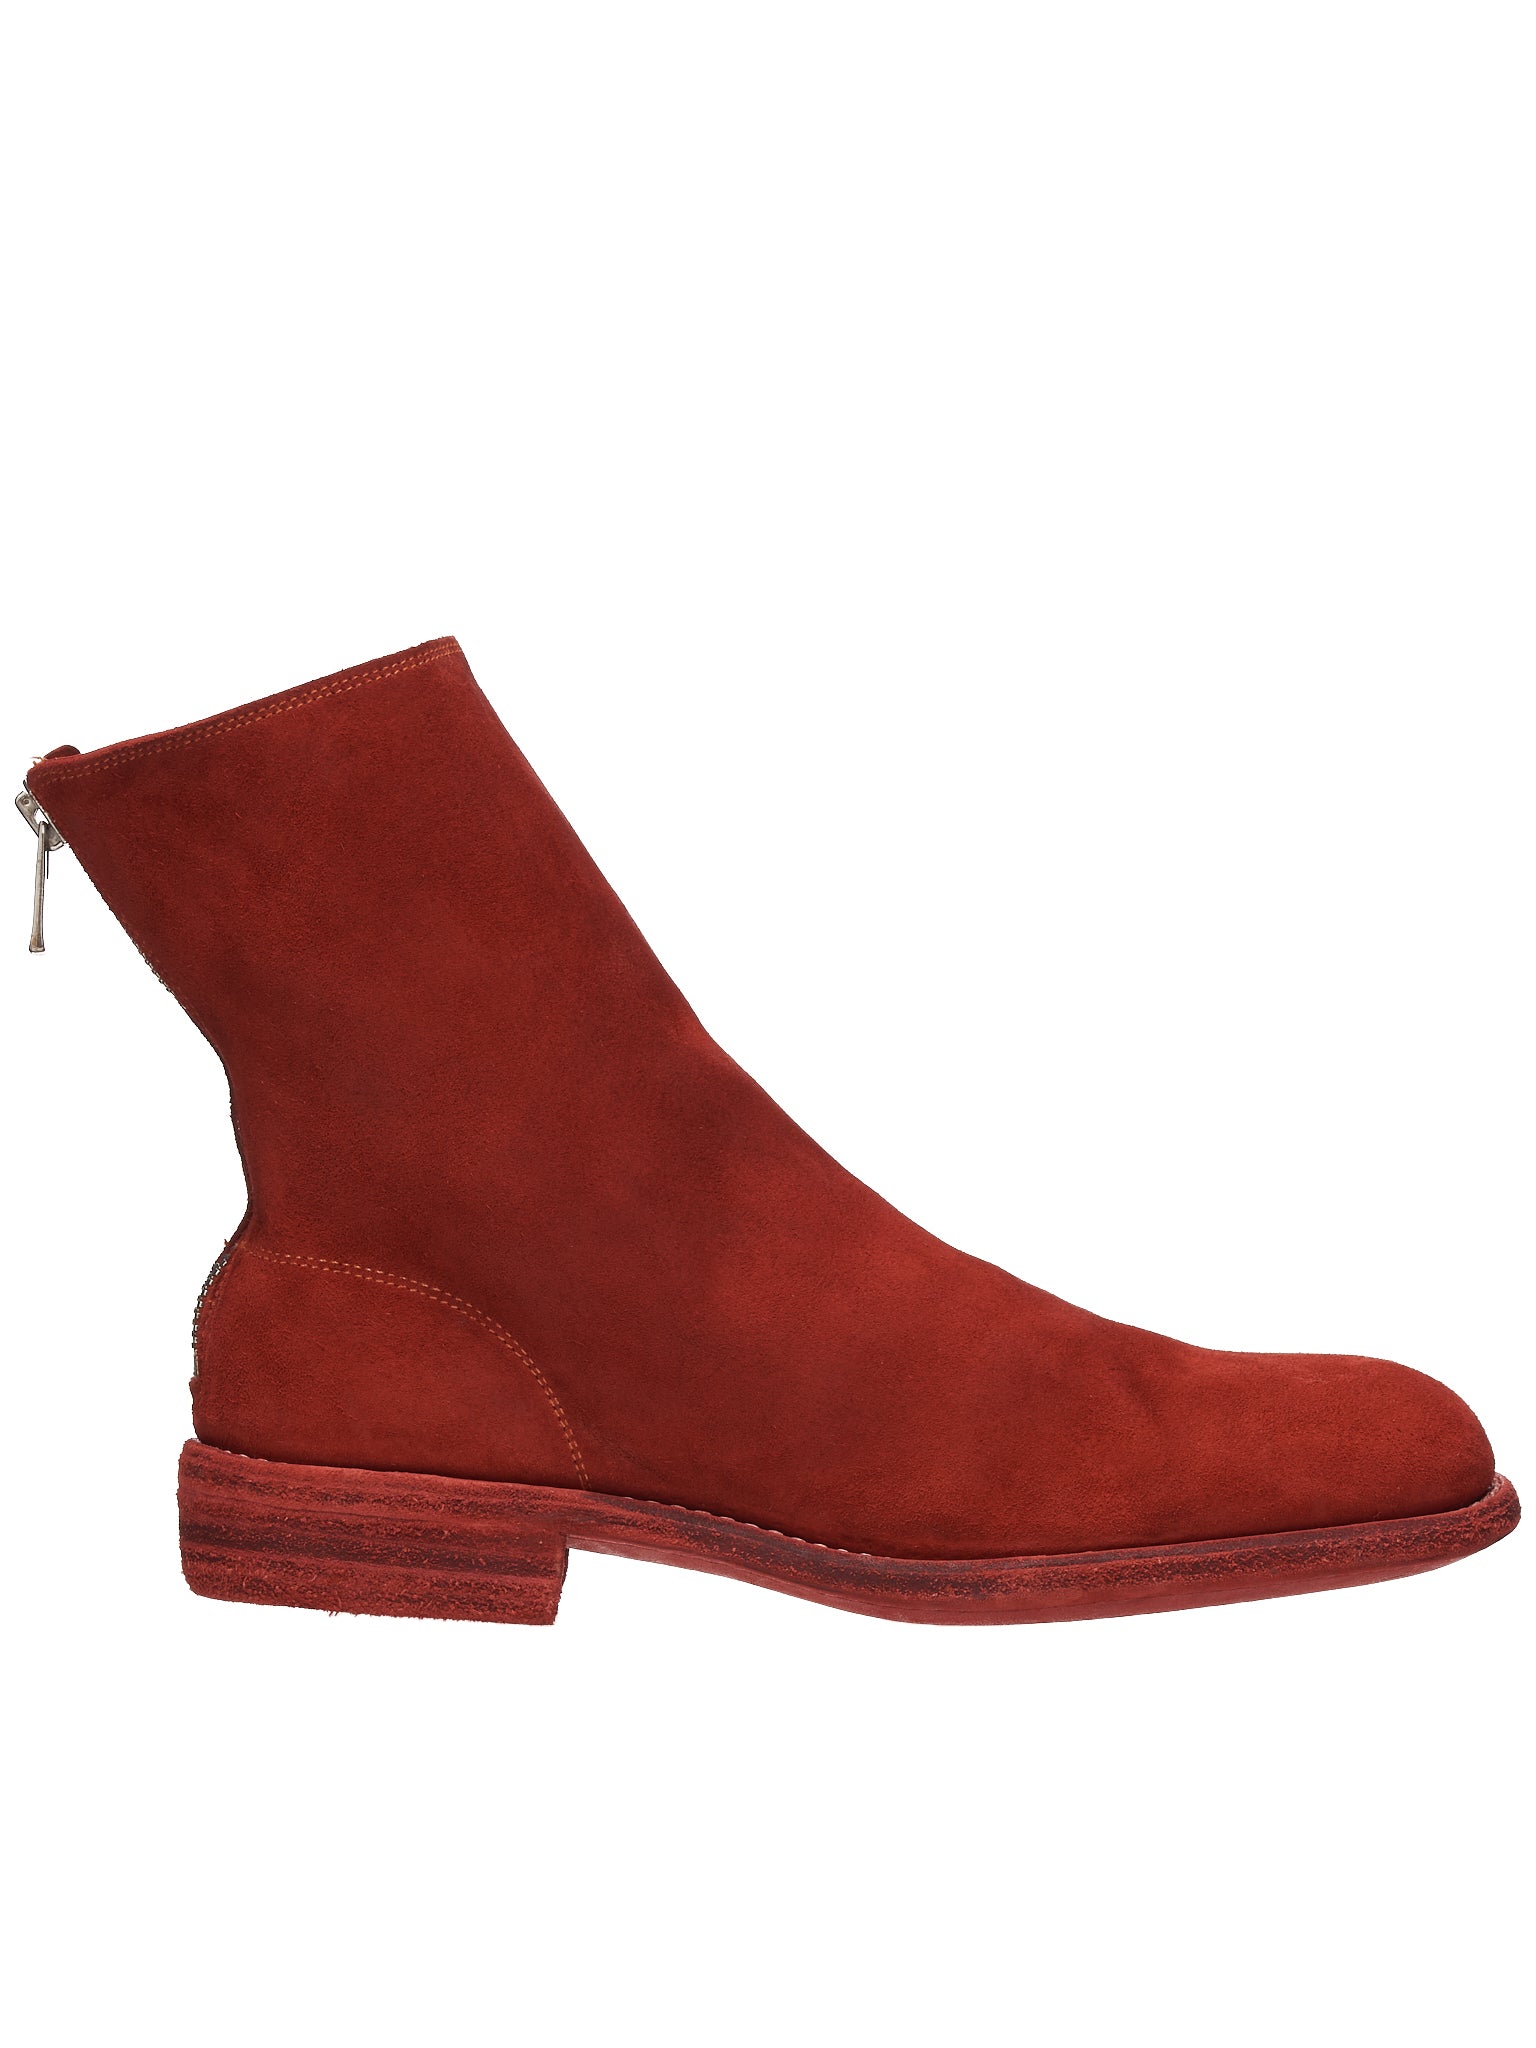 986 Horse Leather Zip Boots (986-HORSE-REVERSE-1006T-RED)